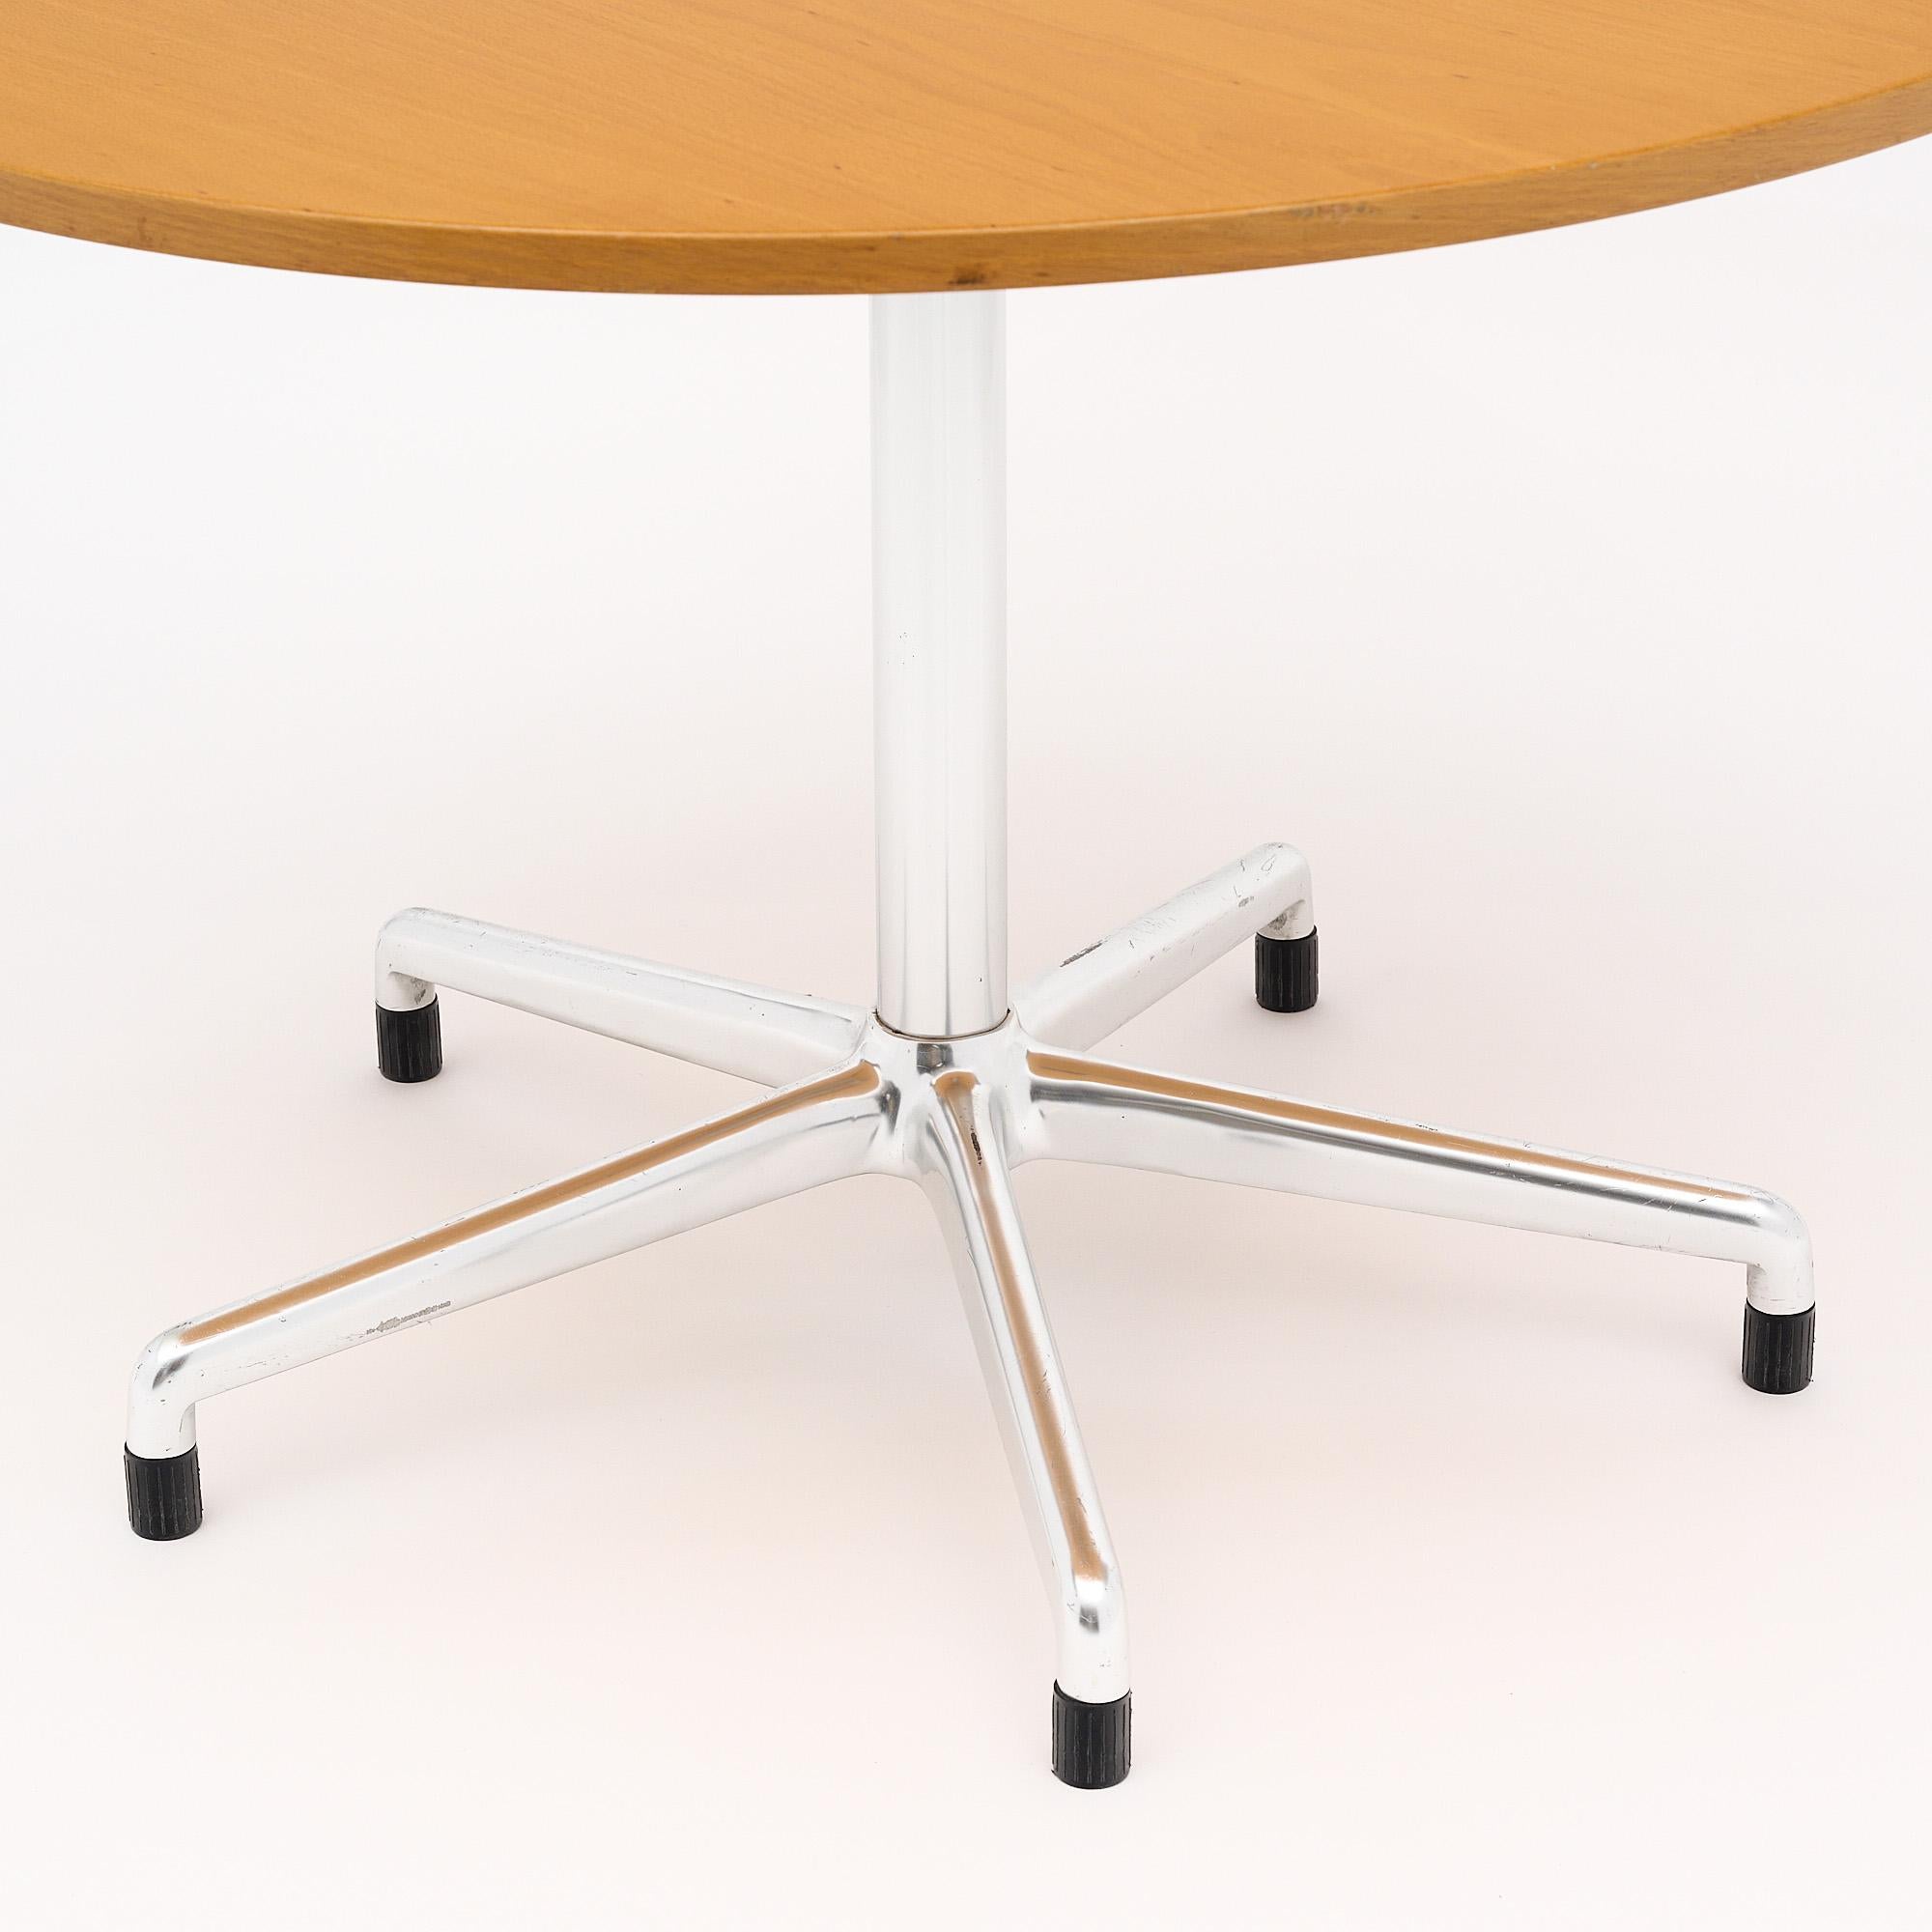 Round dinning table, French, in the manner of Knoll’s conference table design by Eames. This elegant table features a satin wooden top supported by a chromed steel center leg with five feet. The table top can flip for ease of movement and